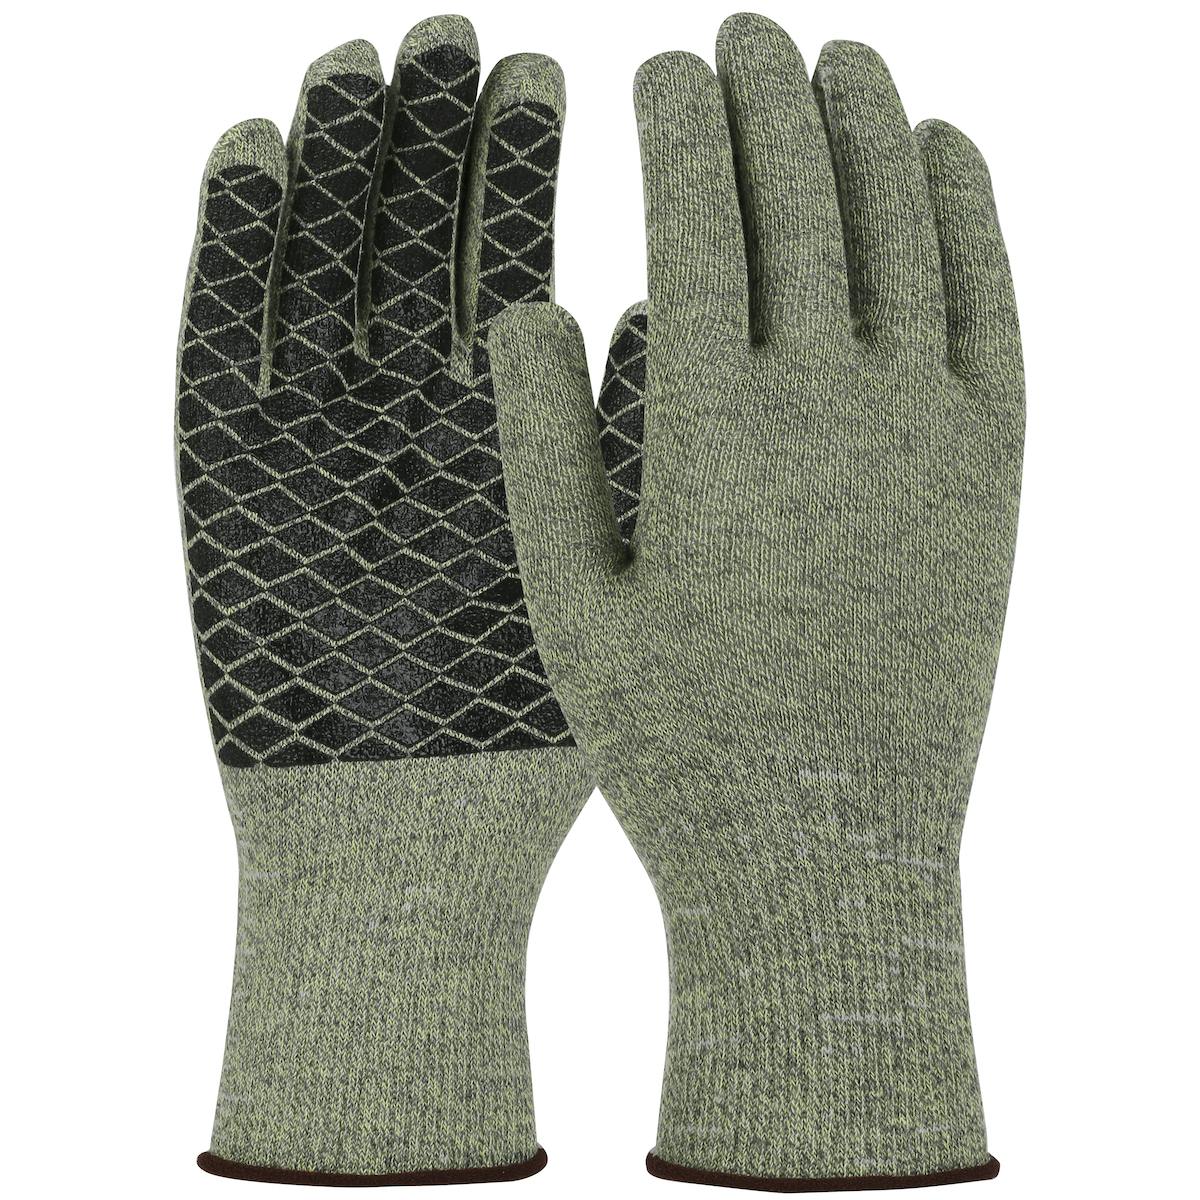 Kut Gard® Seamless Knit ATA® / Elastane Blended Glove with PVC Patterned Grip on Palm (M530-PCX1)_0